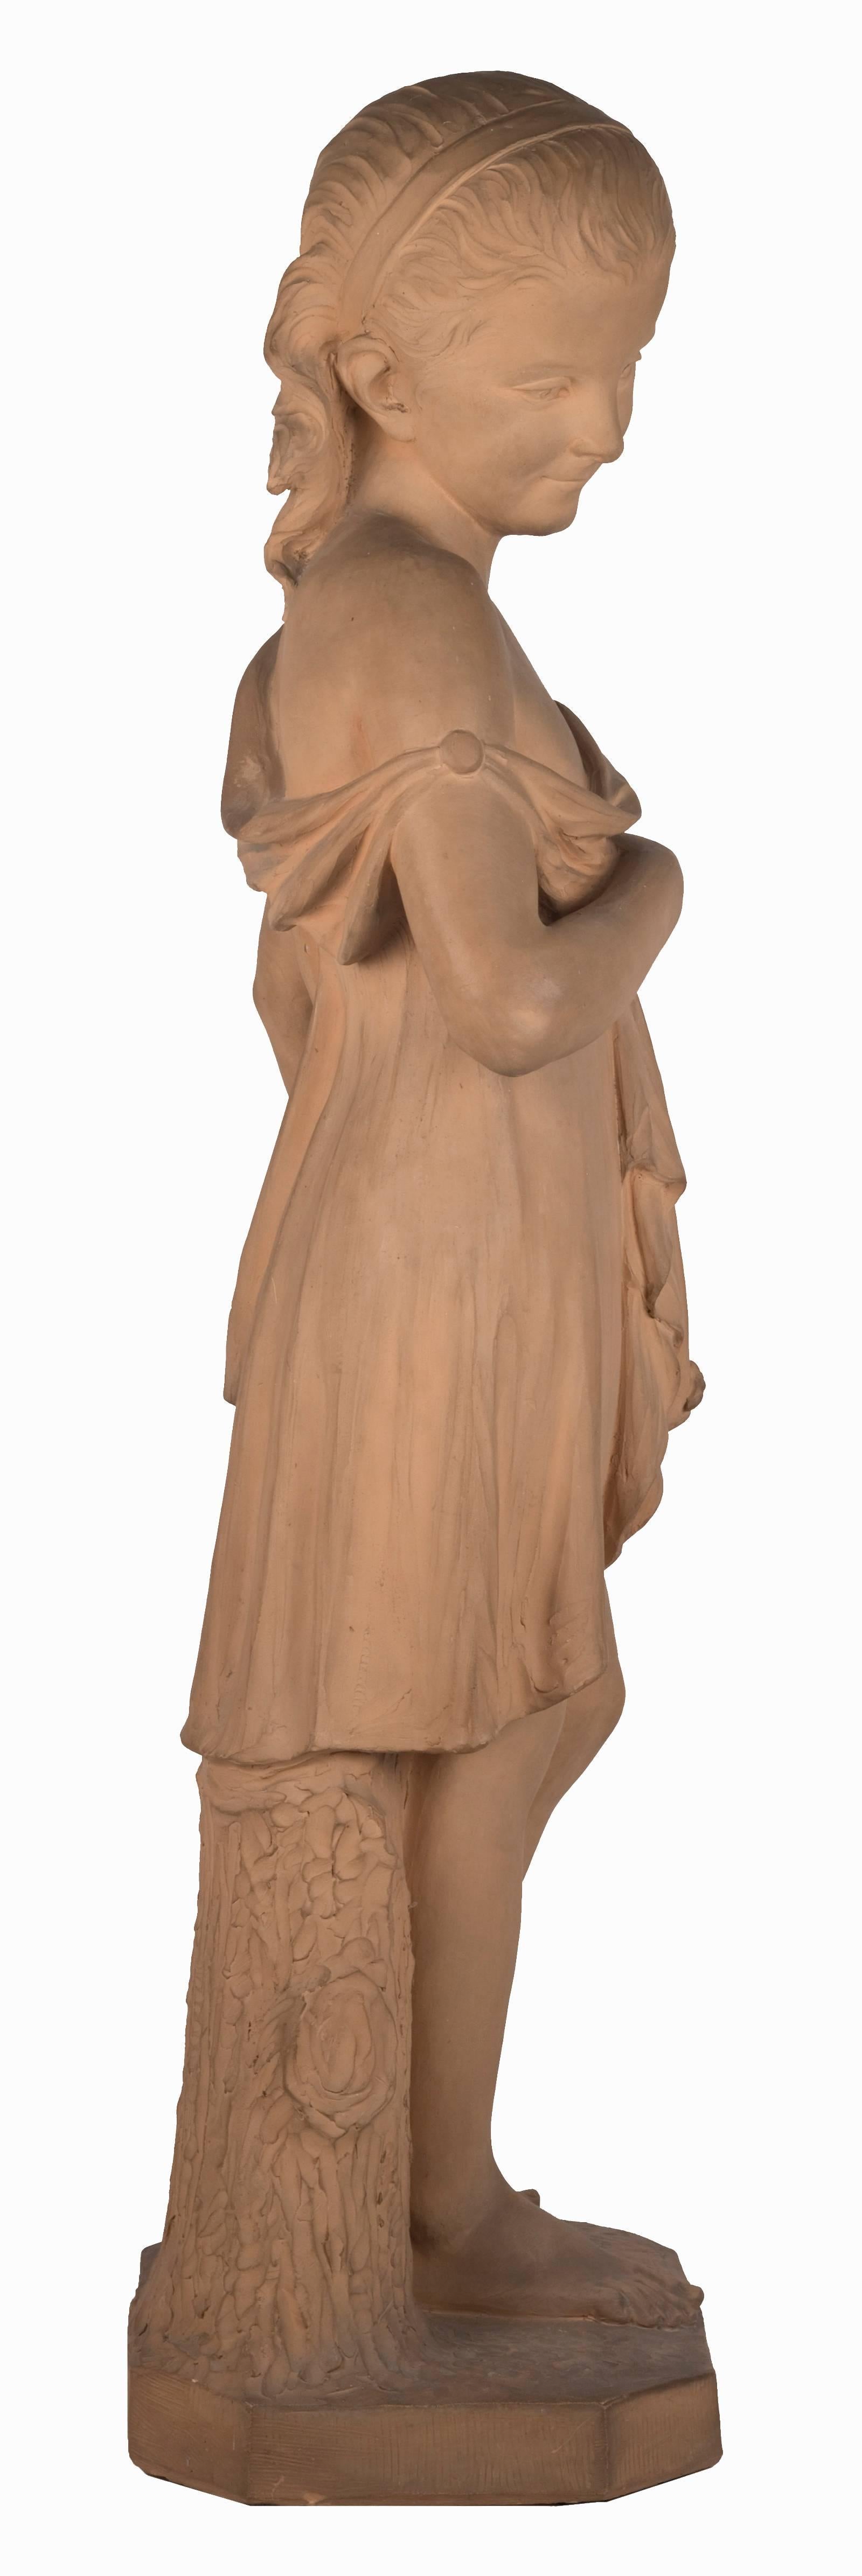 An 19th century French terracotta statue of a young girl, the standing figure in delicately carved drapery leaning against a tree stump with a garland of flowers at her side. The pedestal is incised, CH. LE Bourg 1866.

Lebourg is best known for